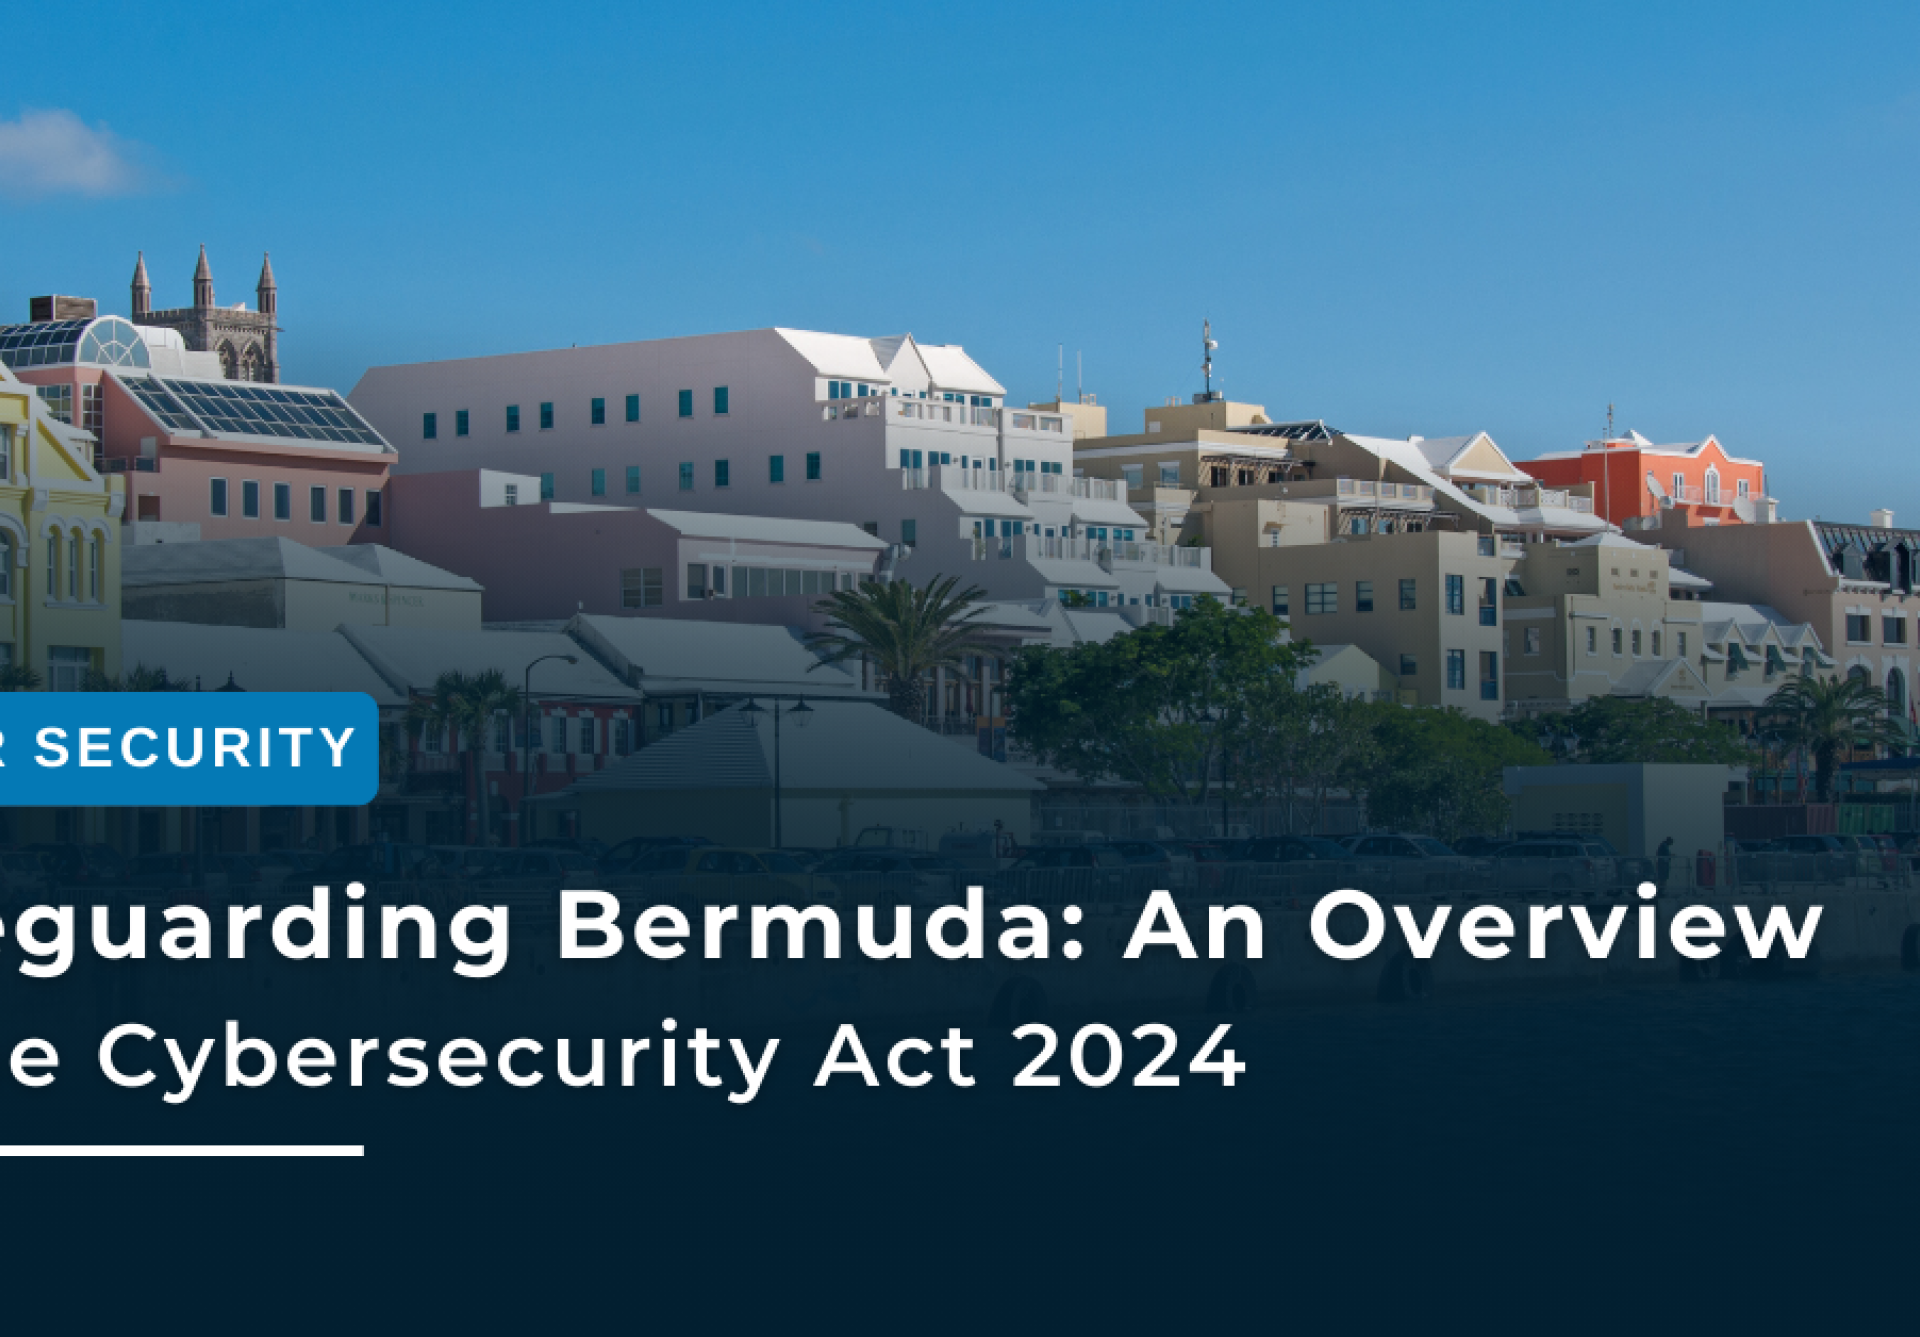 Safeguarding Bermuda: An Overview of the Cybersecurity Act 2024